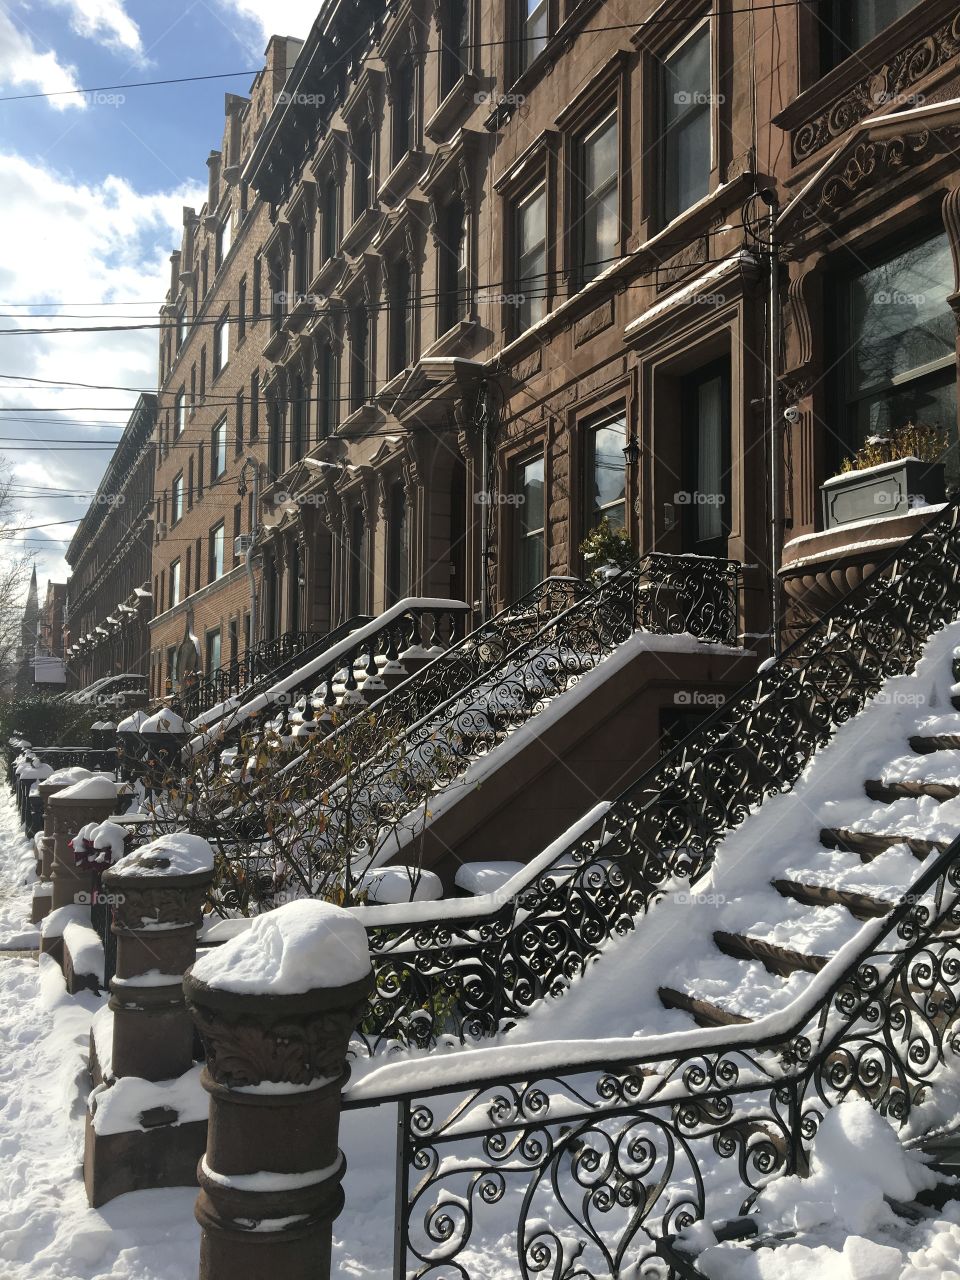 Snow Covered Steps